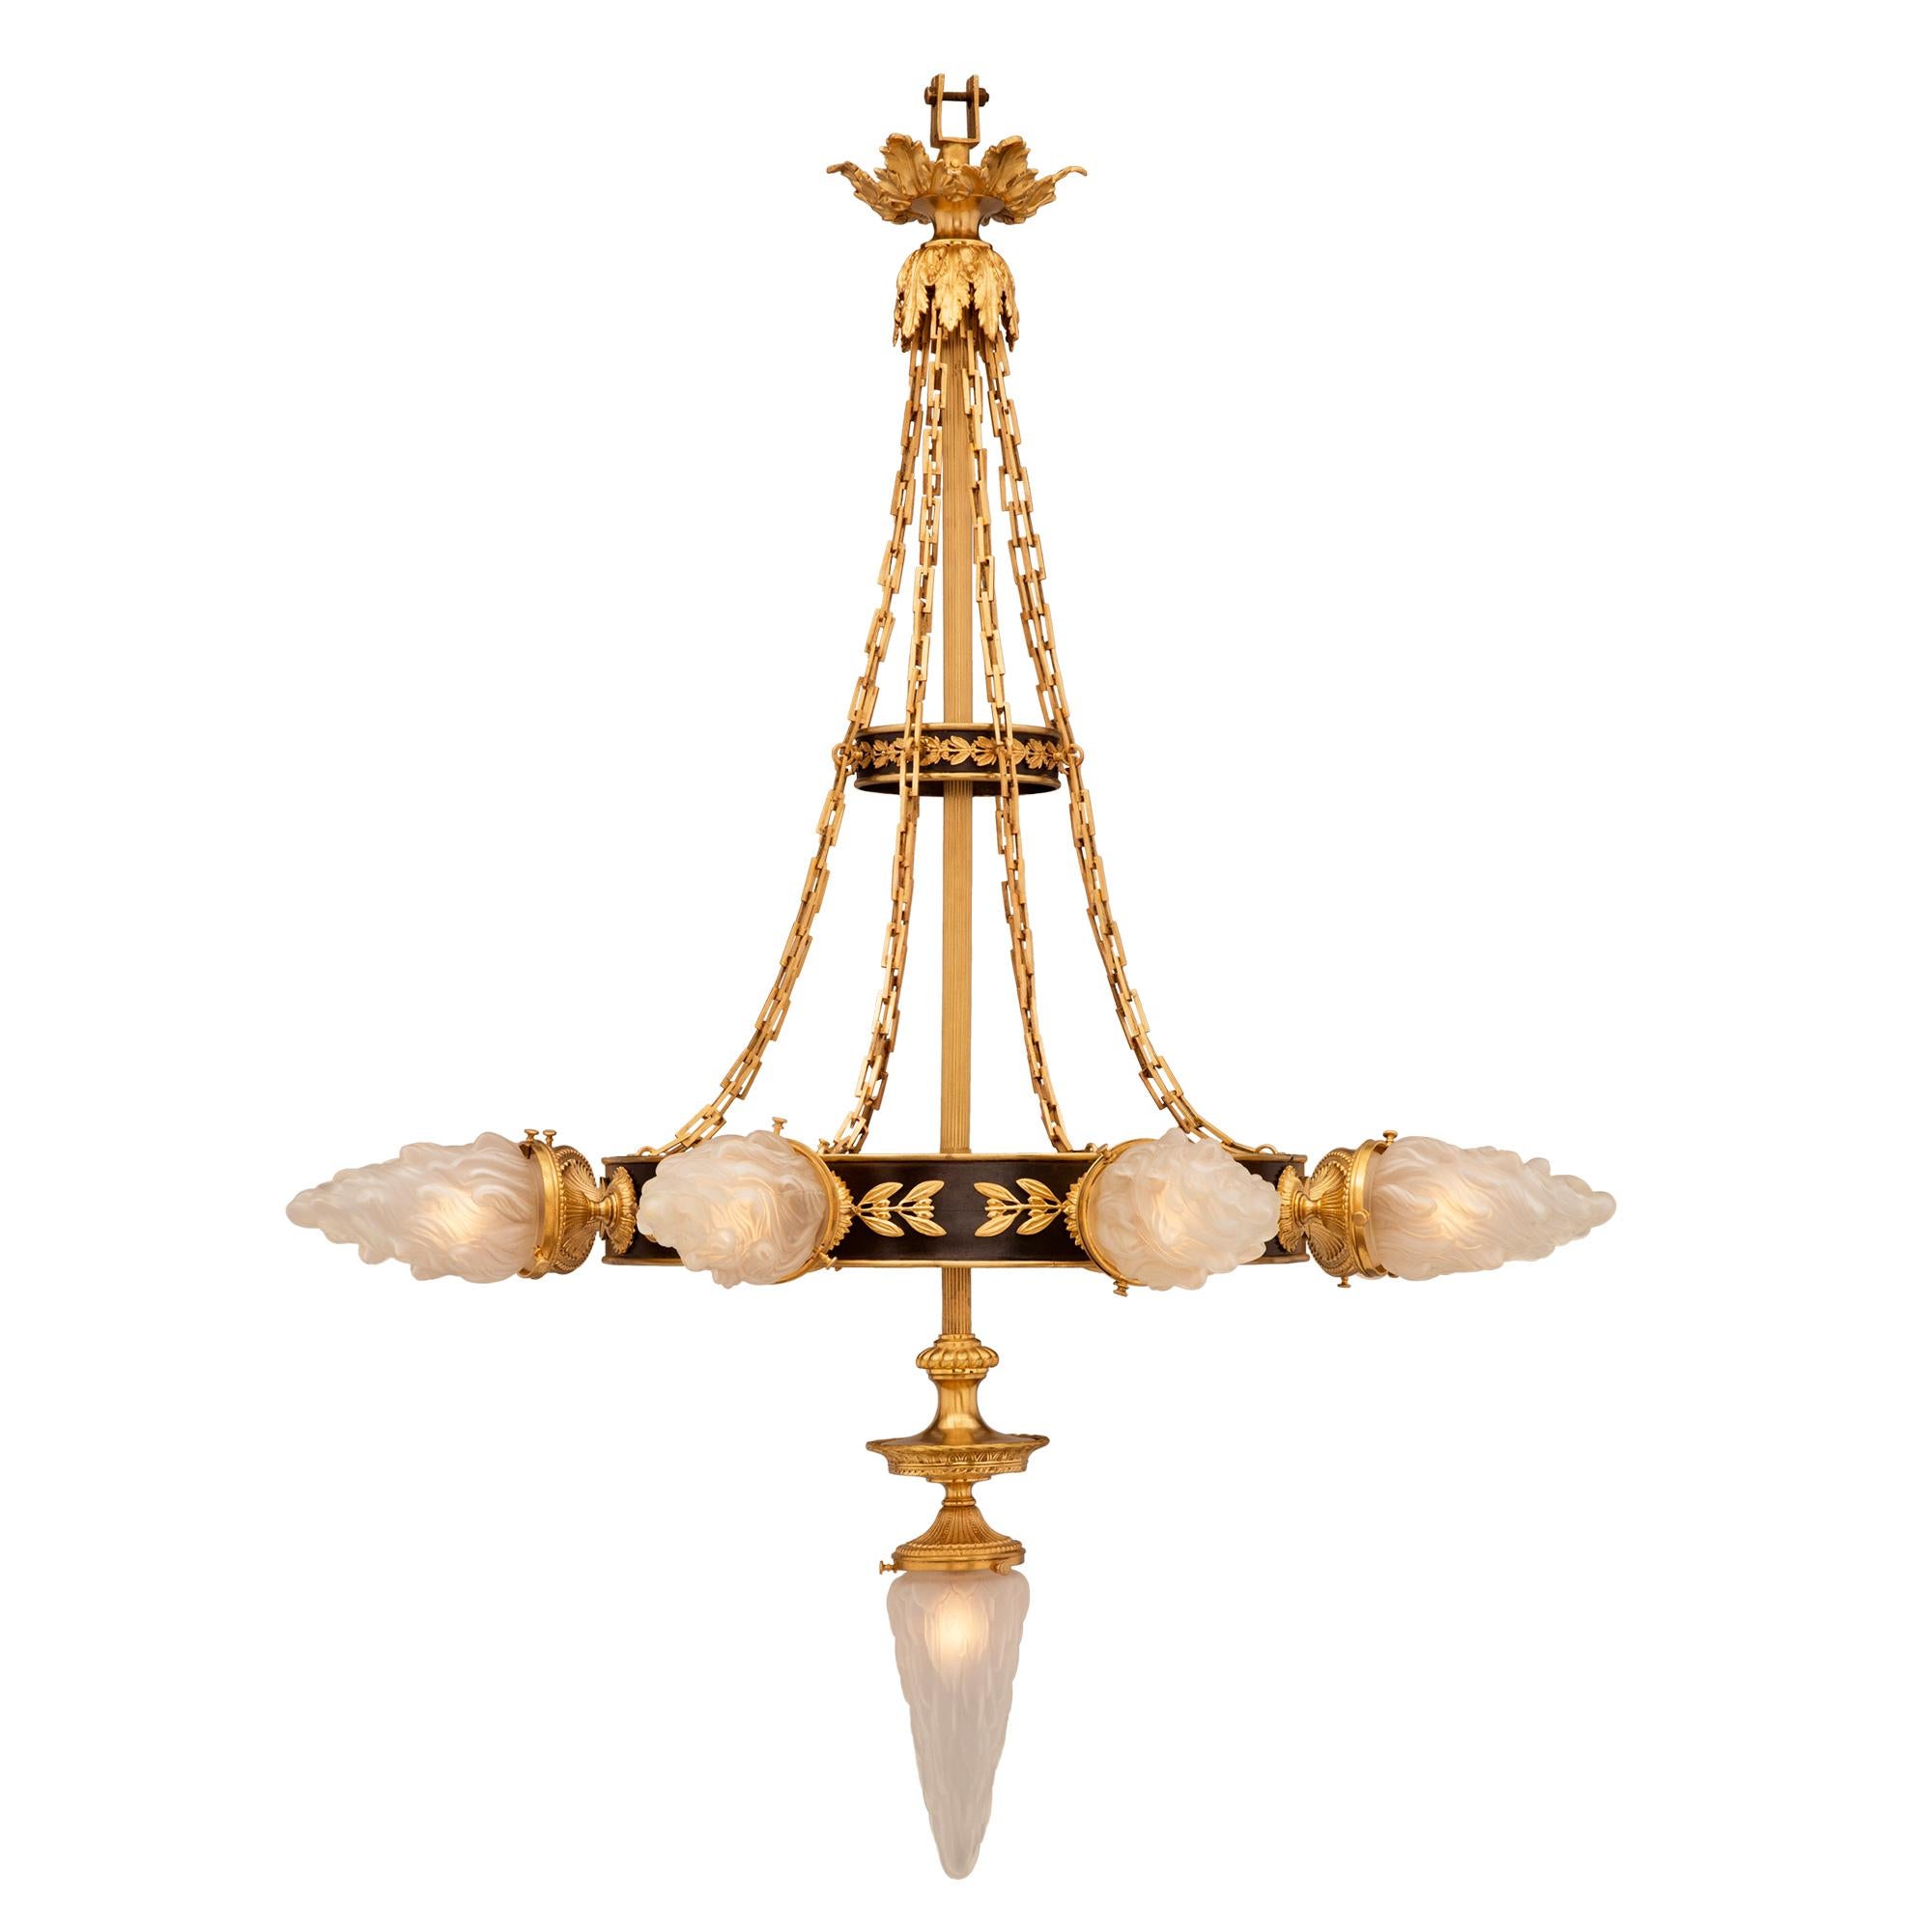 A superb and most decorative pair of French 19th century Neo-Classical patinated bronze, ormolu and frosted glass chandeliers. The chandeliers are centered by their original striking bottom inverted illuminated crystal flames below the lovely fluted